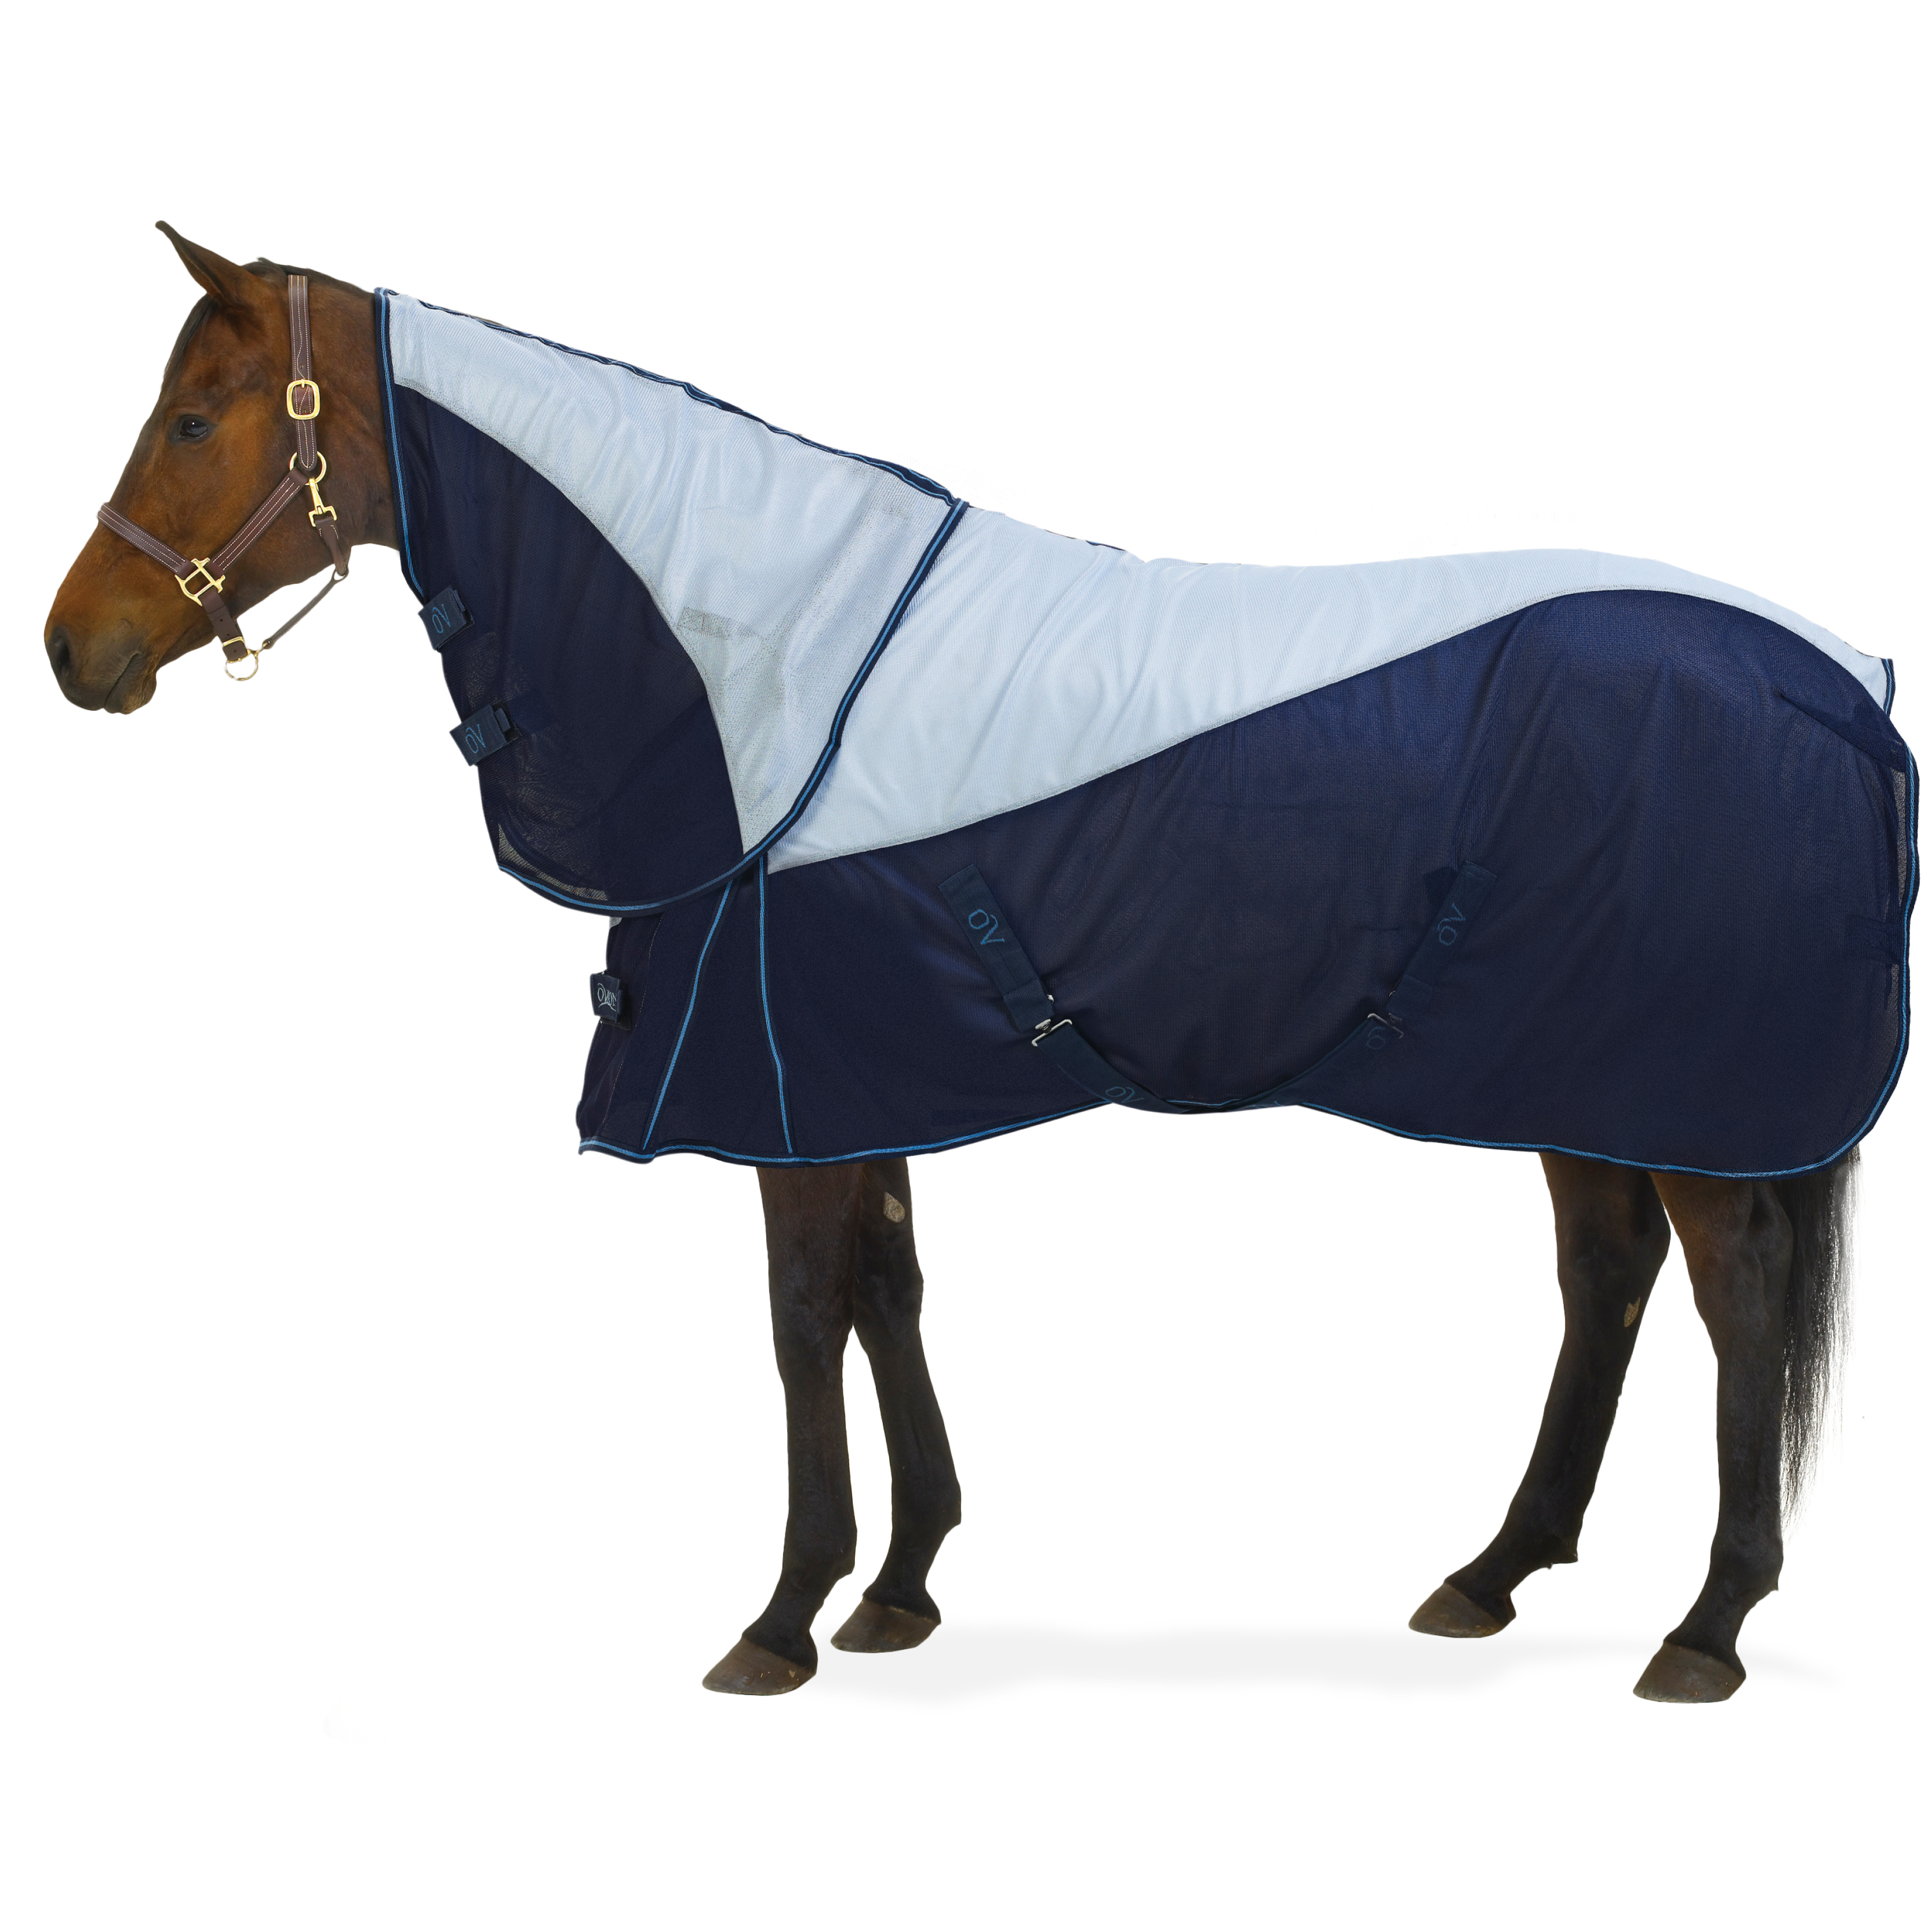 Ovation Super Fly Sheet with Neck Cover Navy and Light Blue